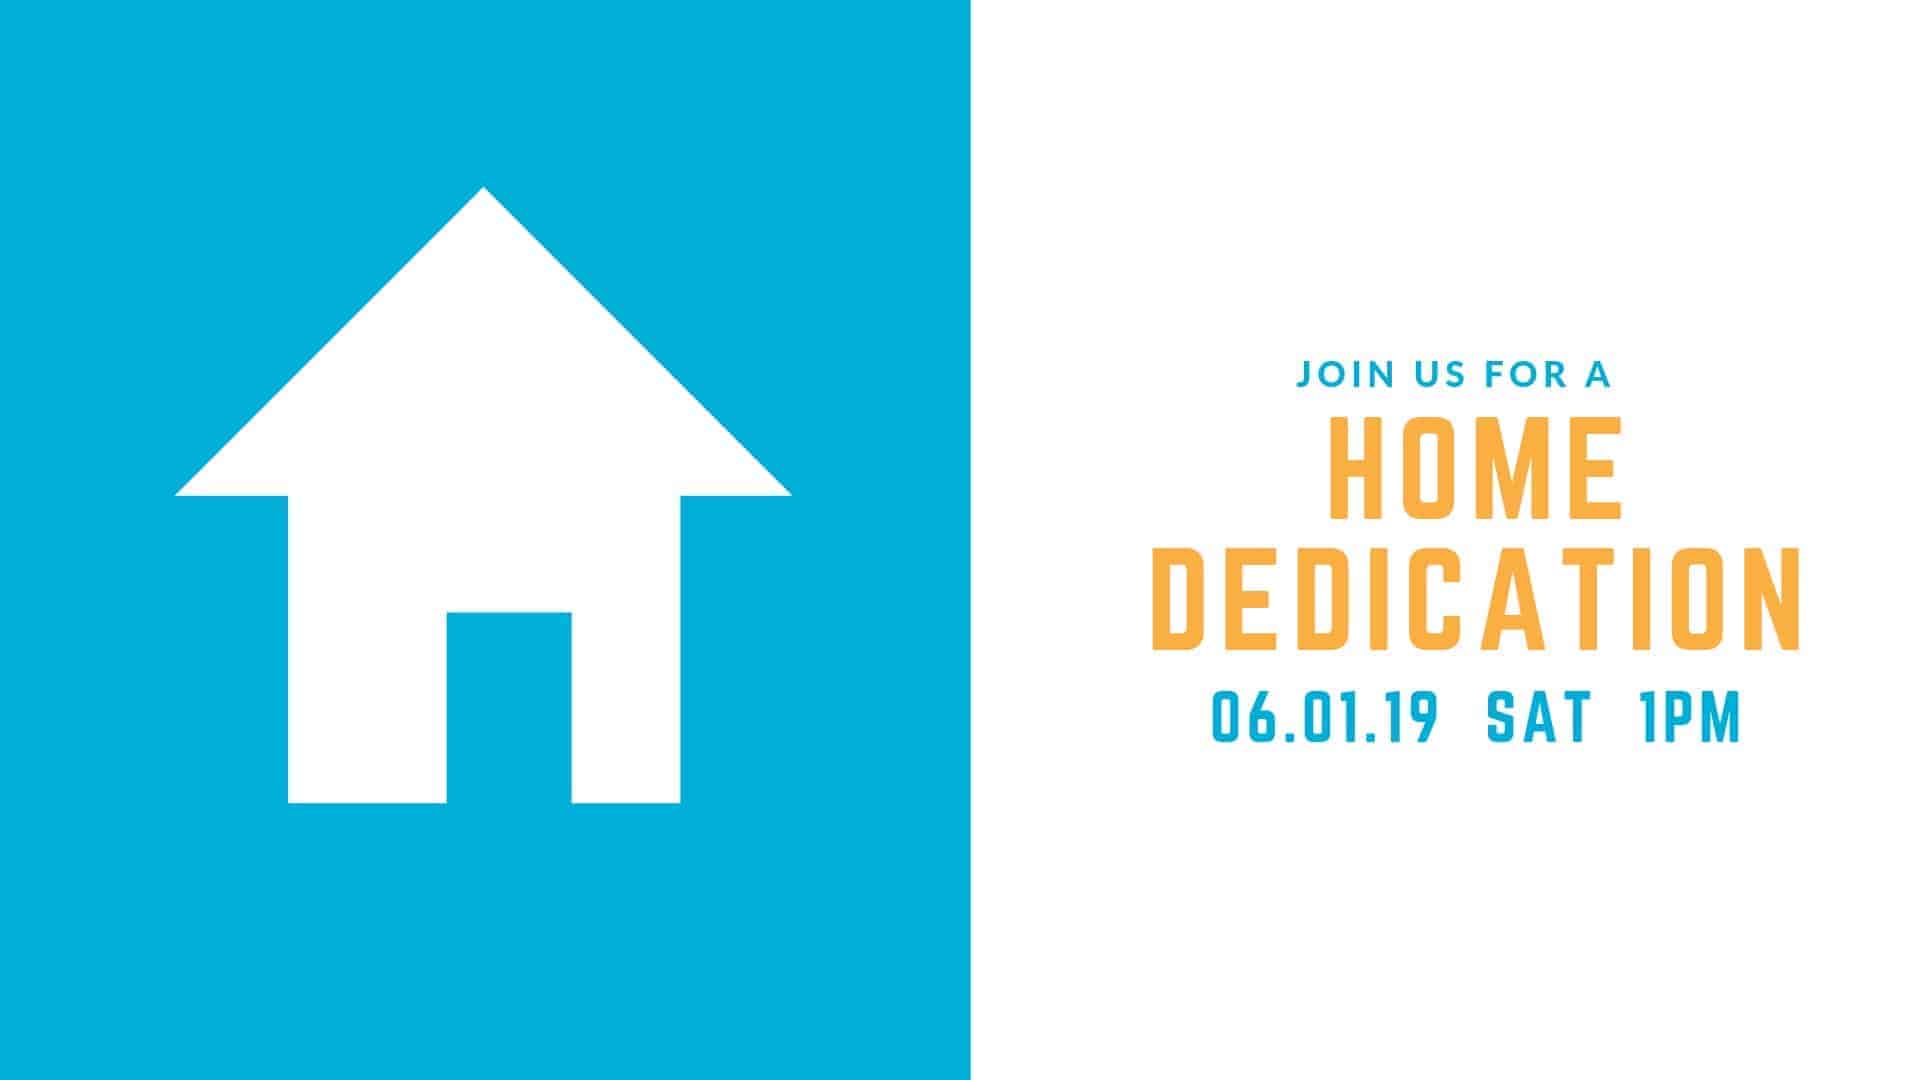 Join us for a home dedication - June, 1, 2019 at 1pm